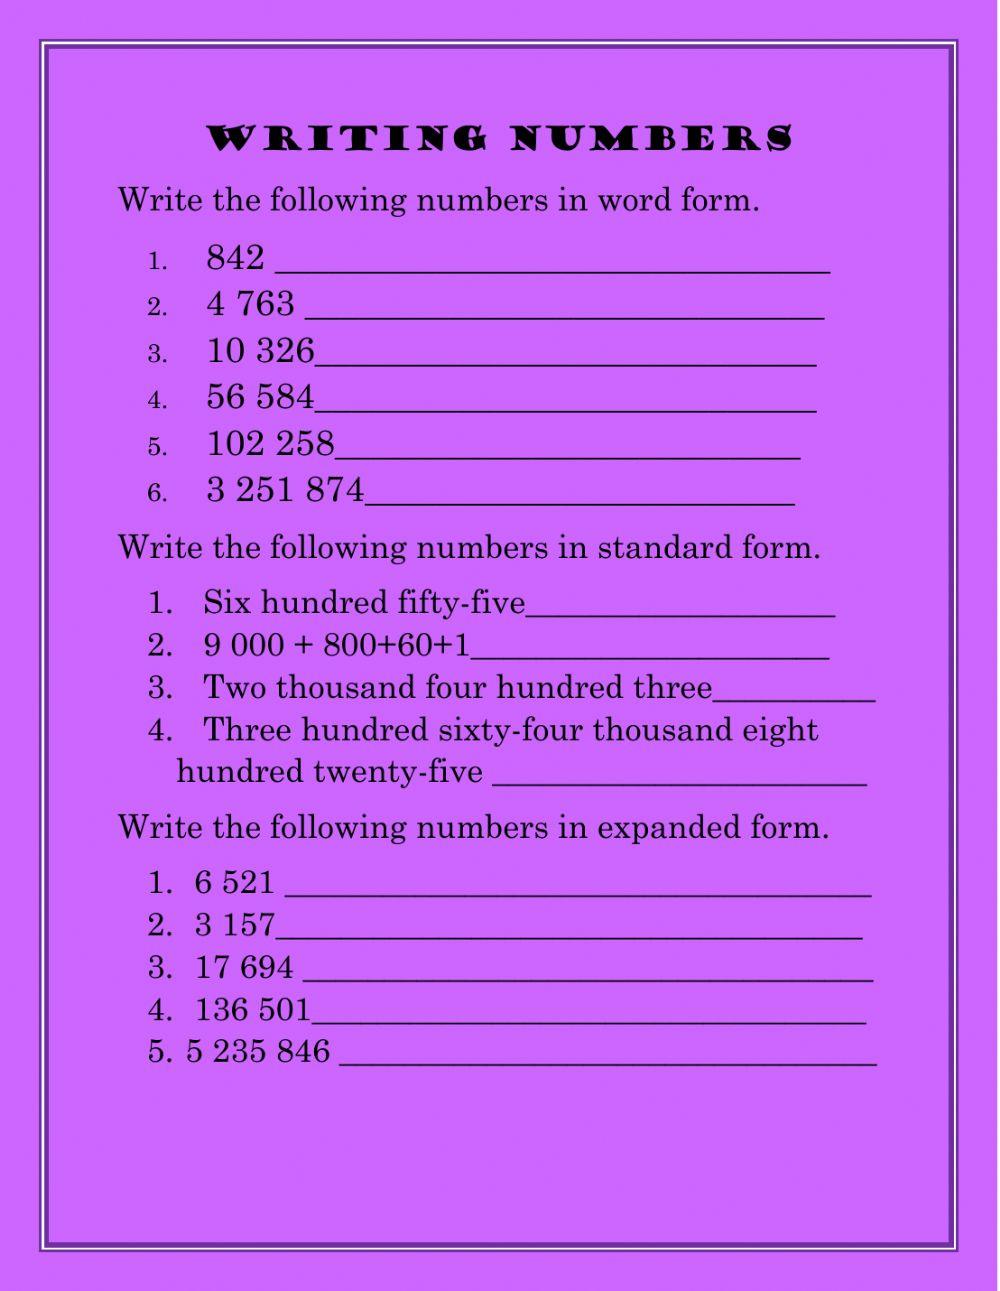 writing-numbers-exercise-live-worksheets